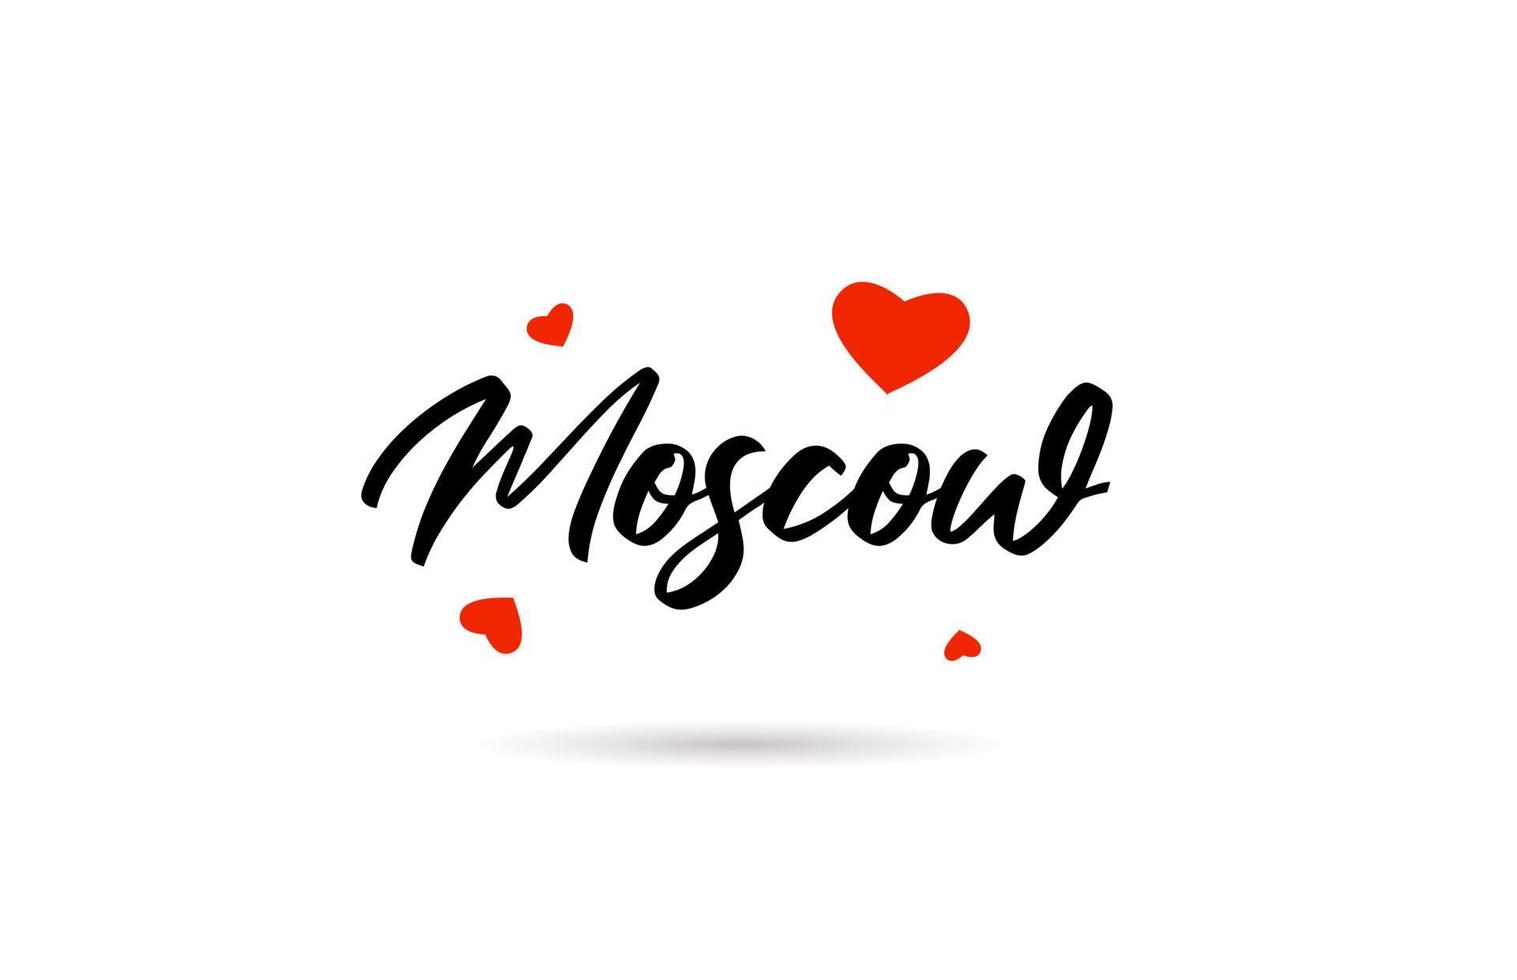 Moscow handwritten city typography text with love heart vector